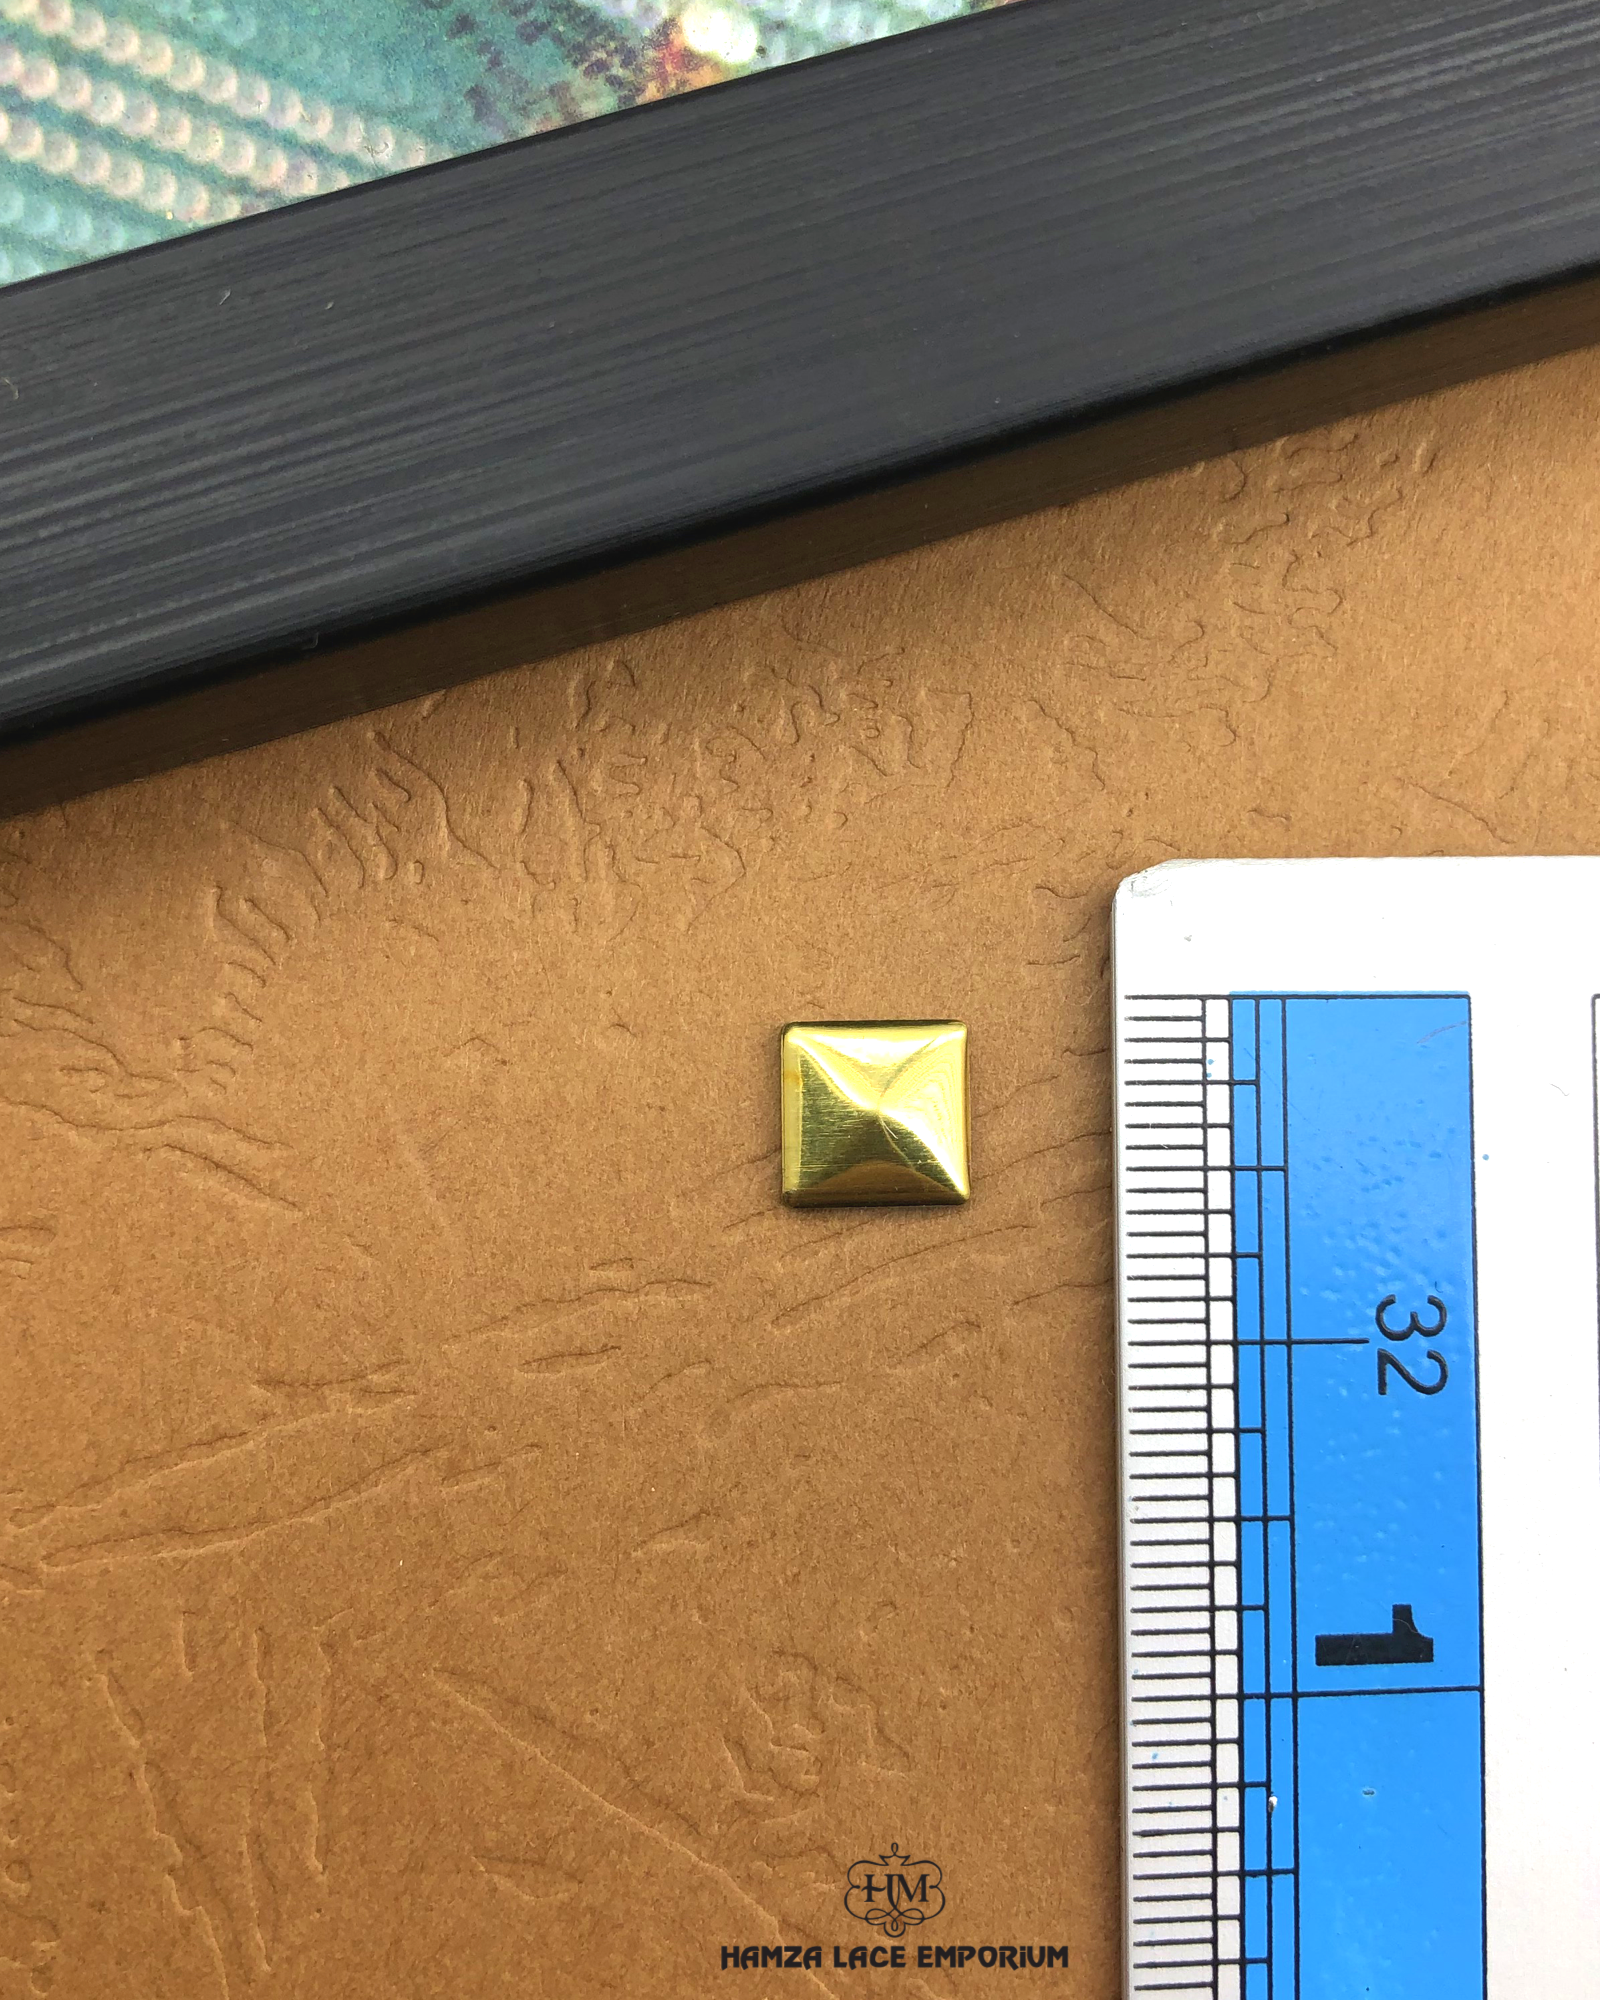 The size of the Beautifully designed 'Square Shape Plastic Accessory PB115' is measured by using a ruler